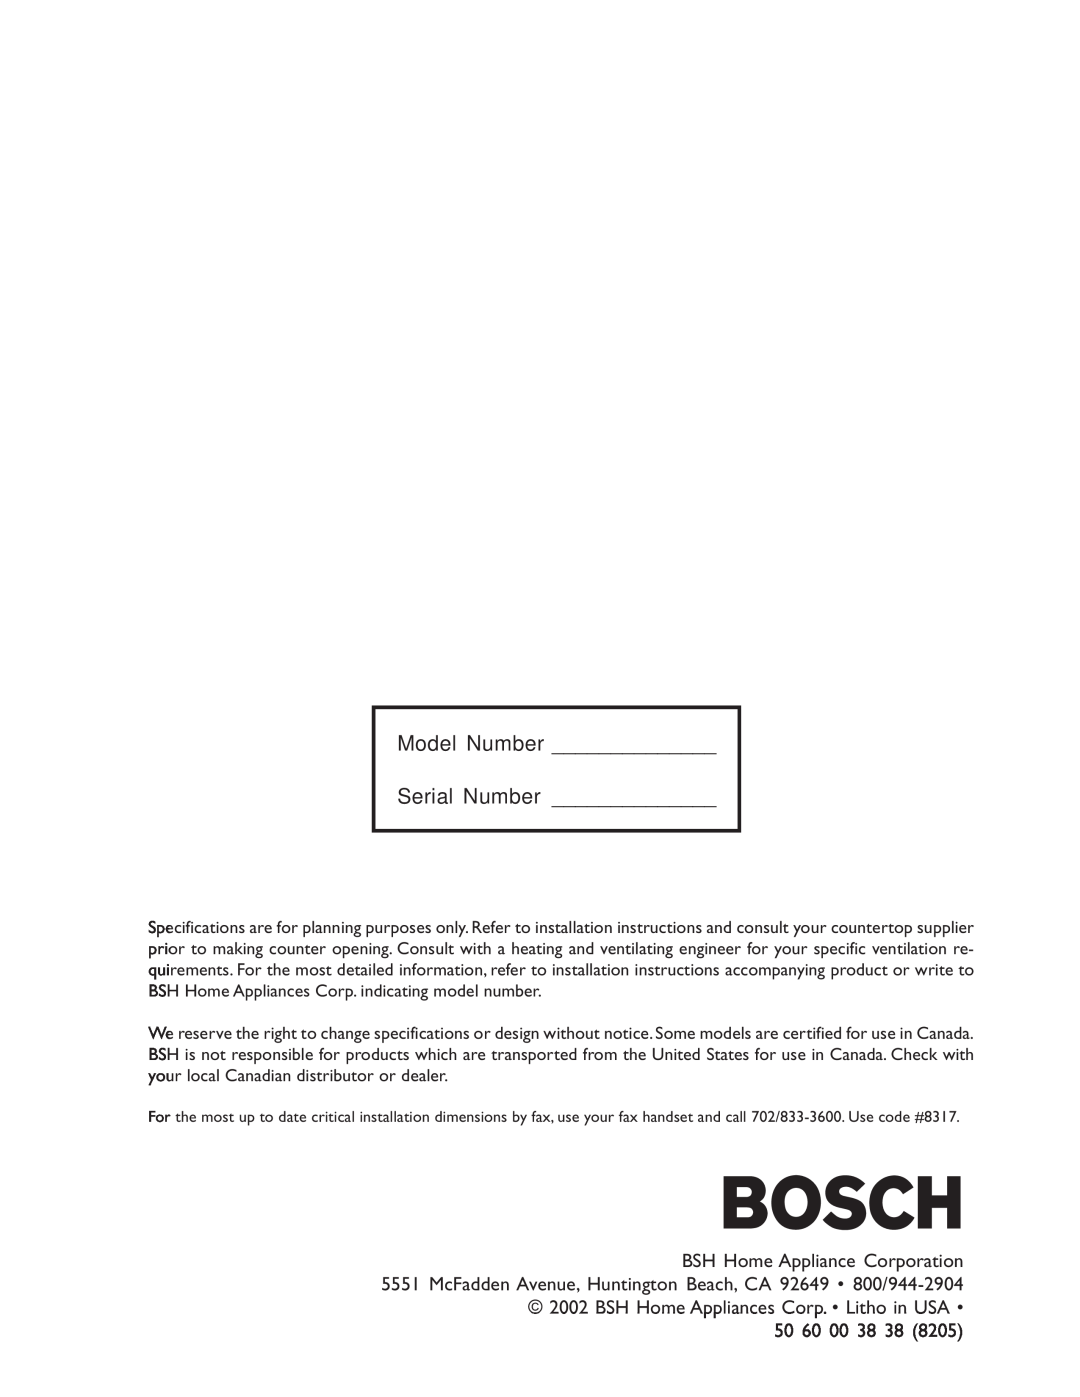 Bosch Appliances NES 930 UC, NES 730 UC manual Model Number Serial Number 